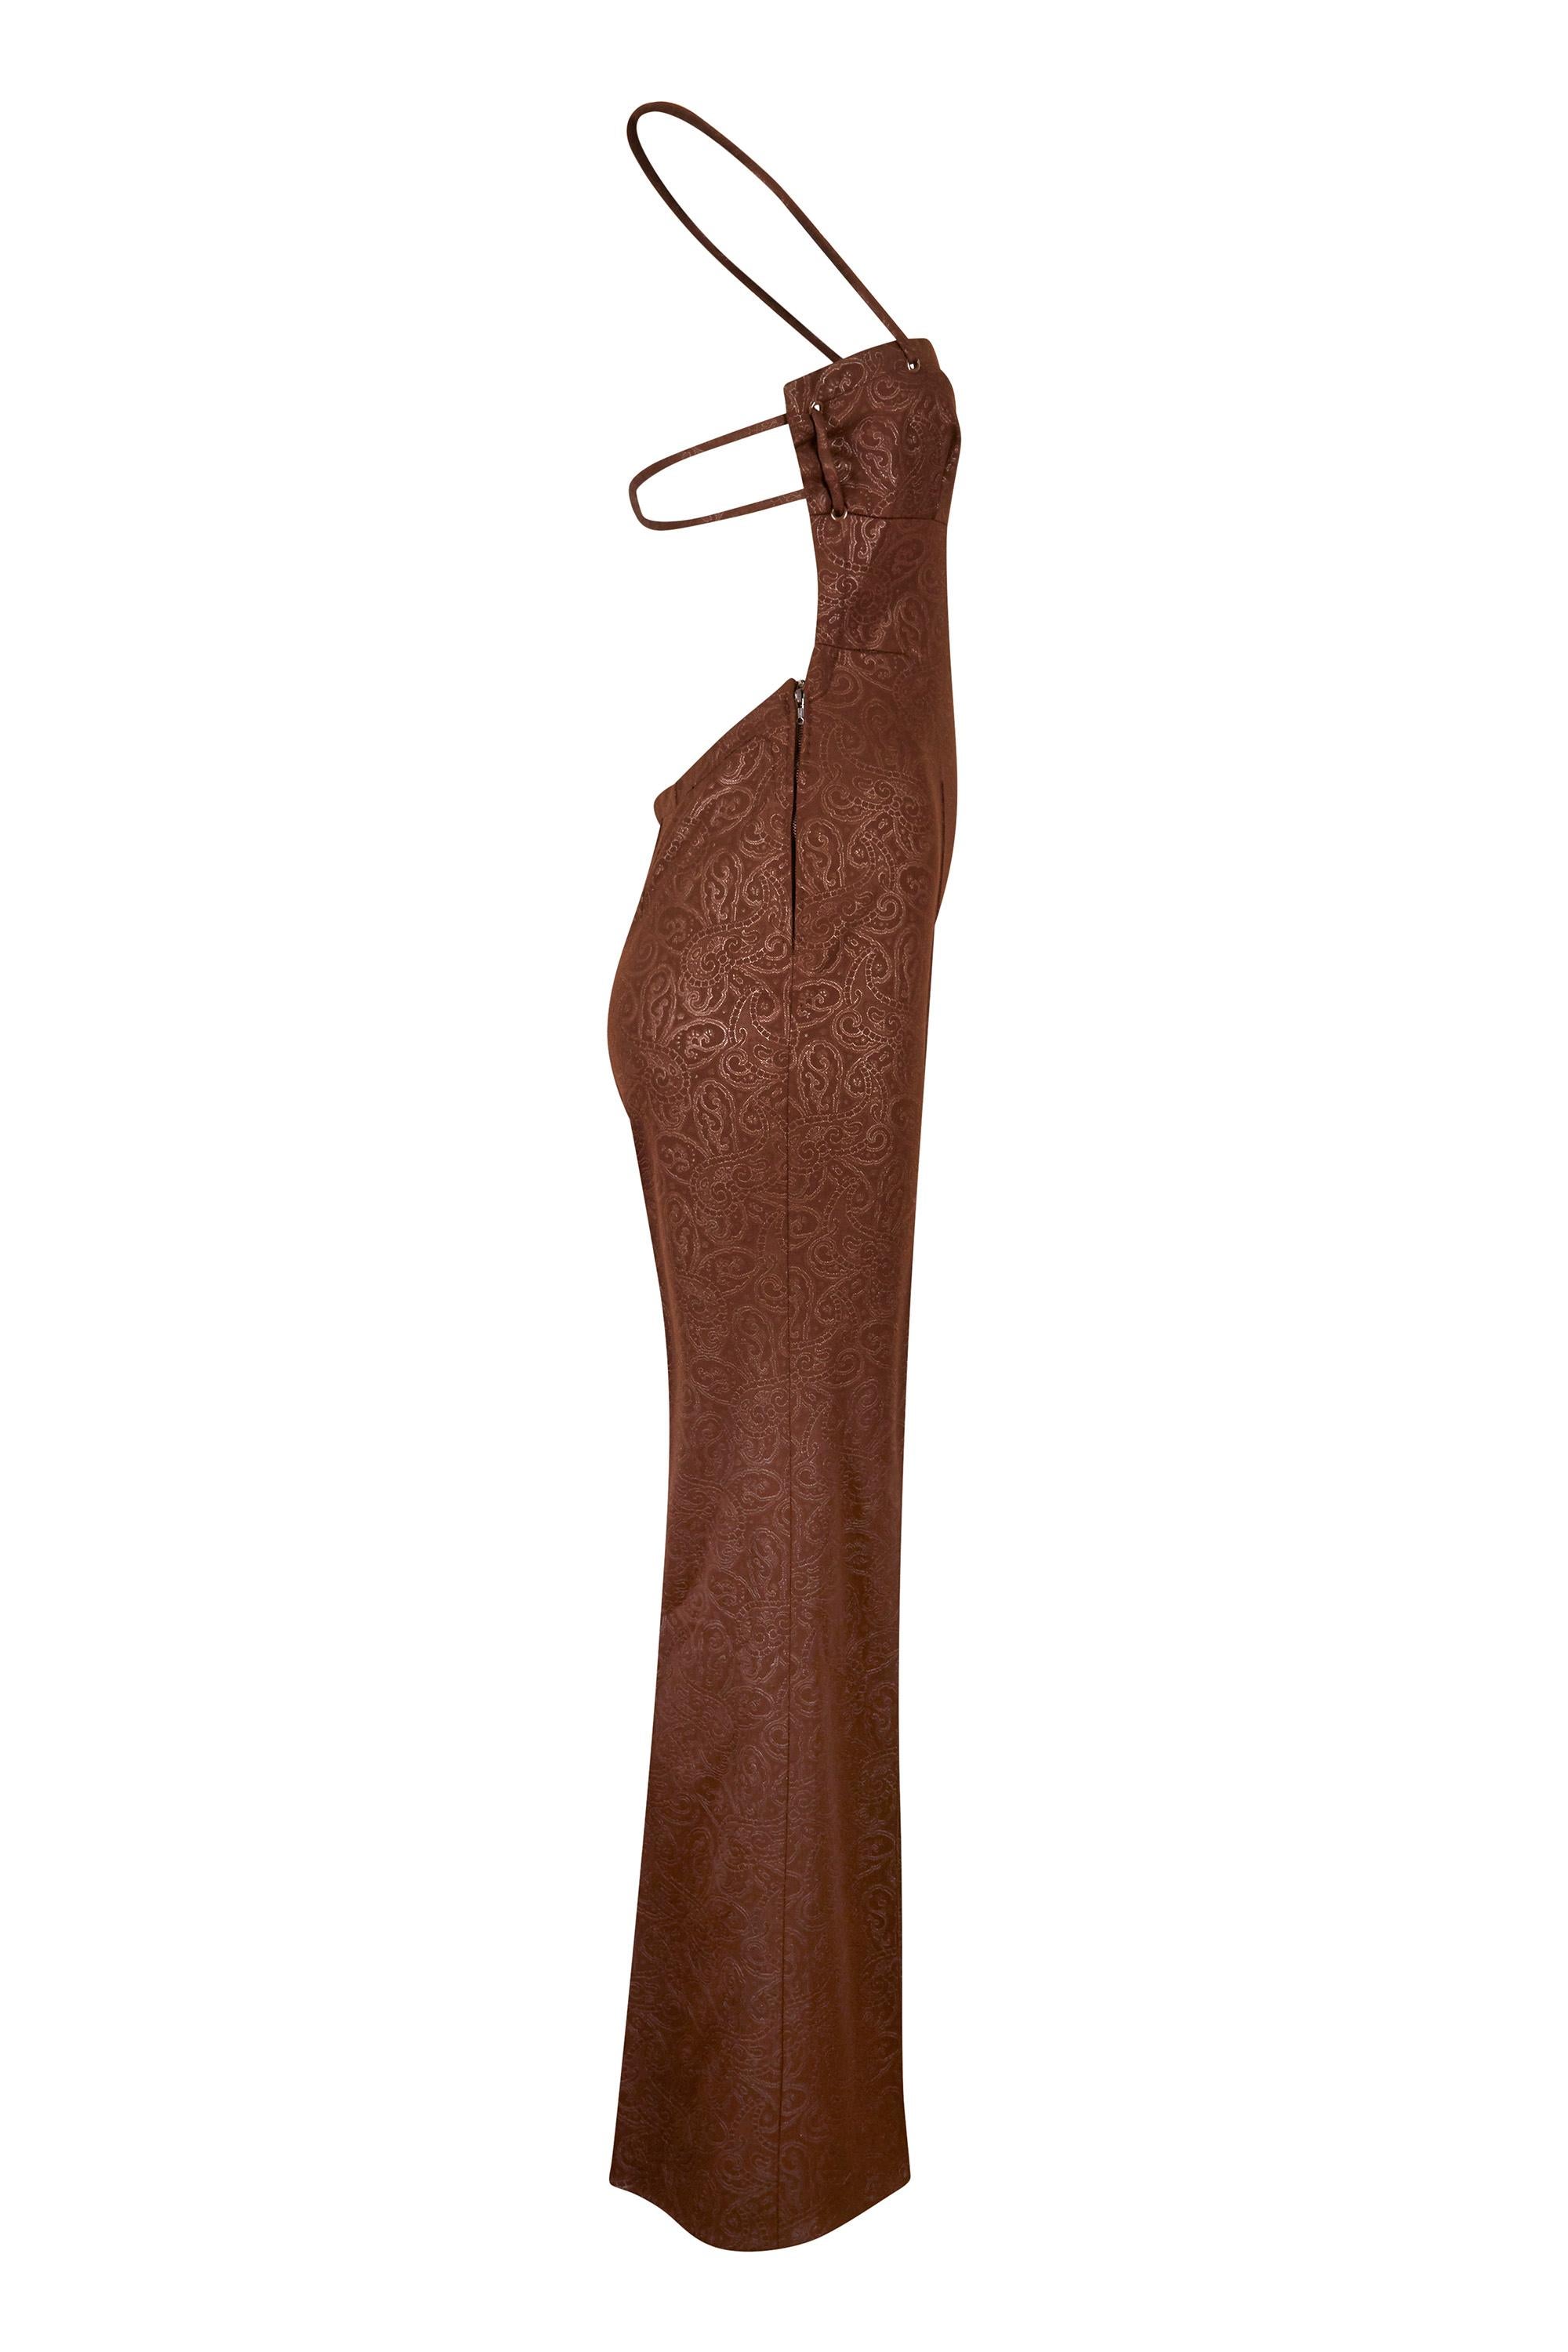 This gorgeous 1970s chocolate brown halter neck jumpsuit with embossed paisley print and flared trouser legs is by French leisure wear designer J.Tiktiner, known for high style beach and play wear for the Cote d’Azur set. This lovely piece is